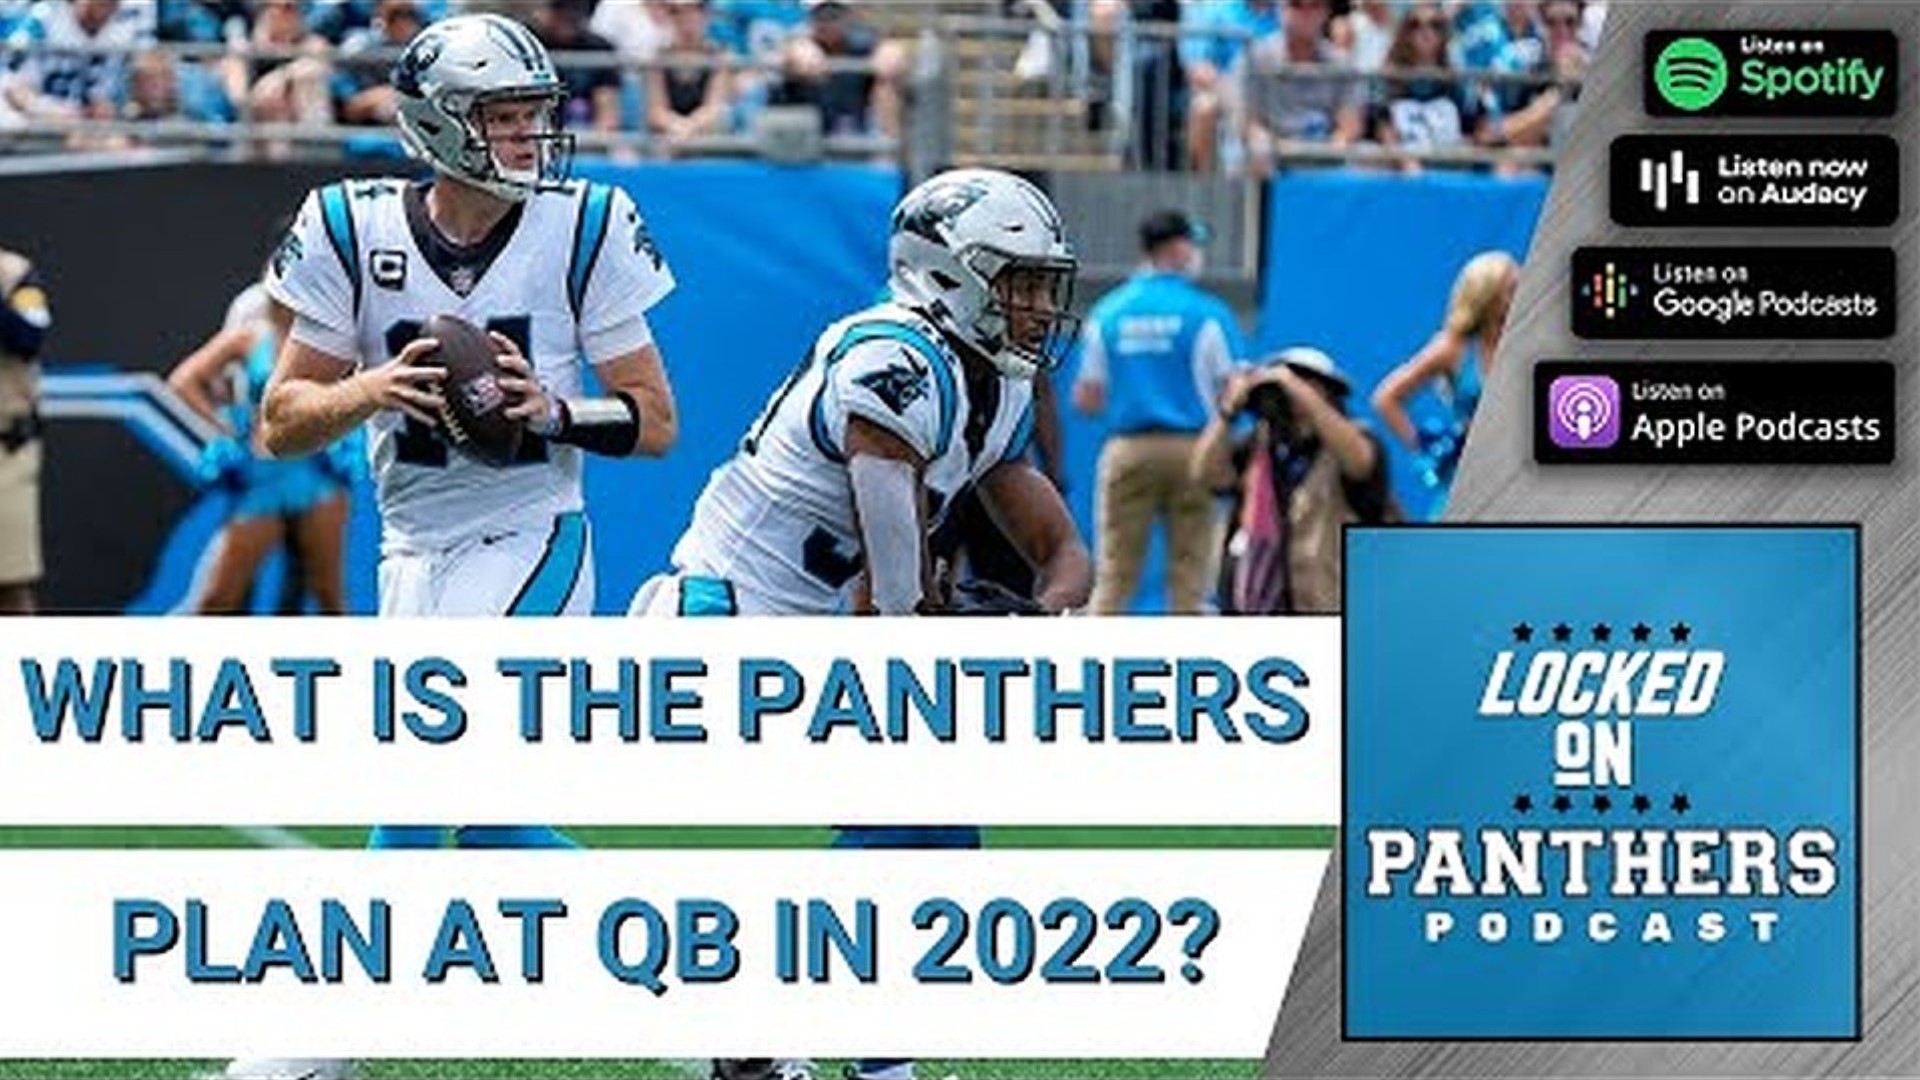 The Carolina Panthers have spent the majority of the 2022 offseason trying to upgrade the quarterback position